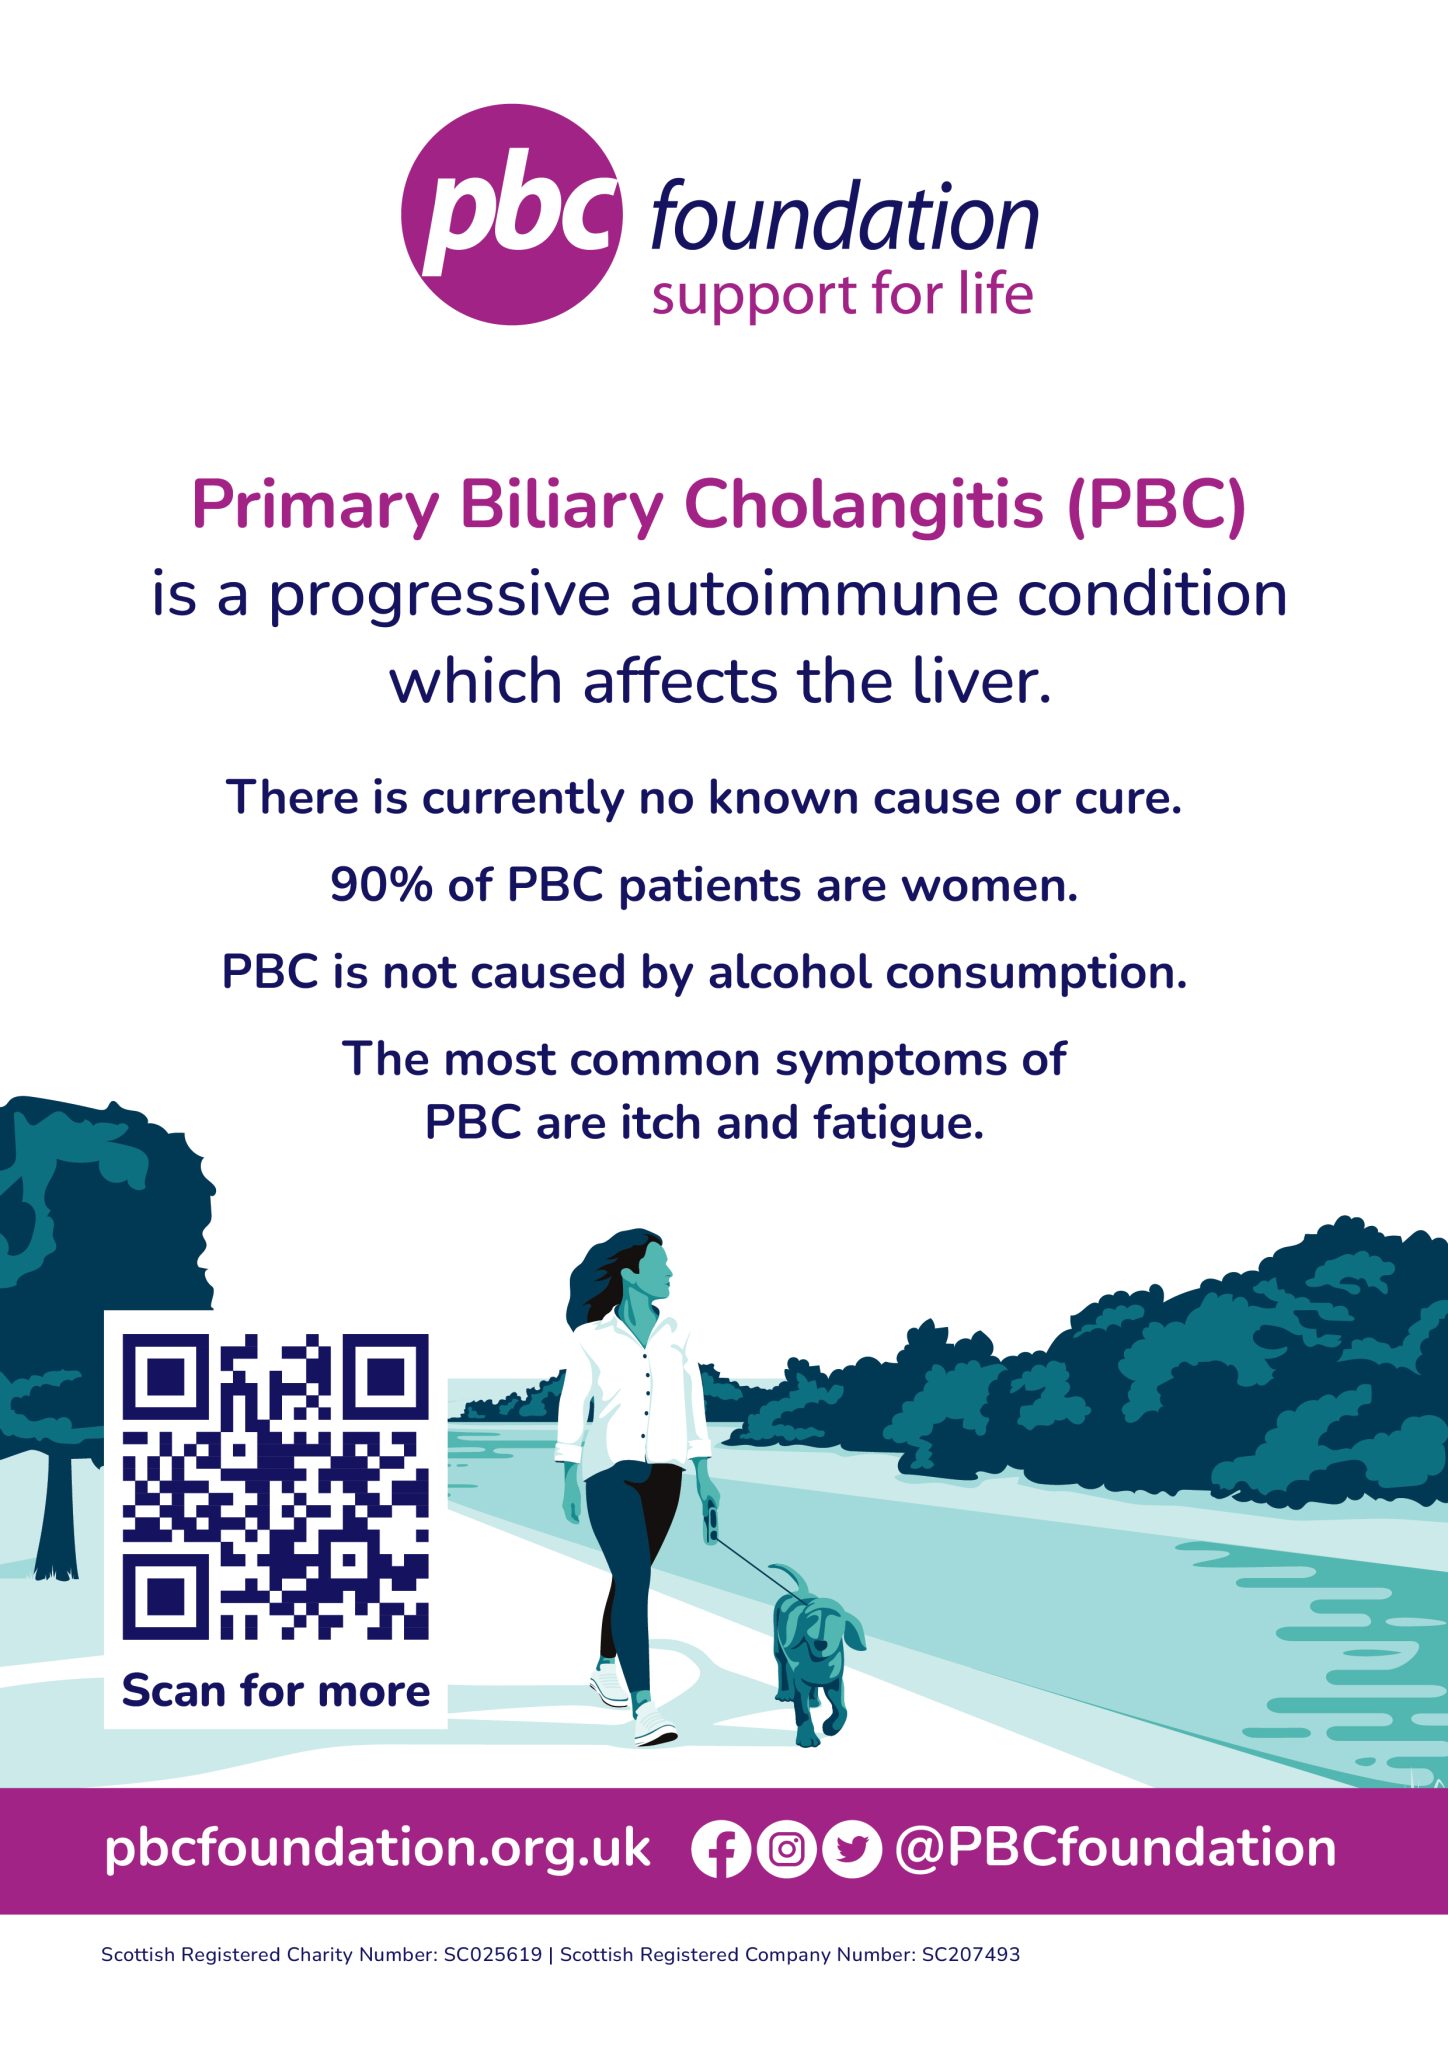 Poster to use at fundraising events with details about PBC and a QR code to access the website.